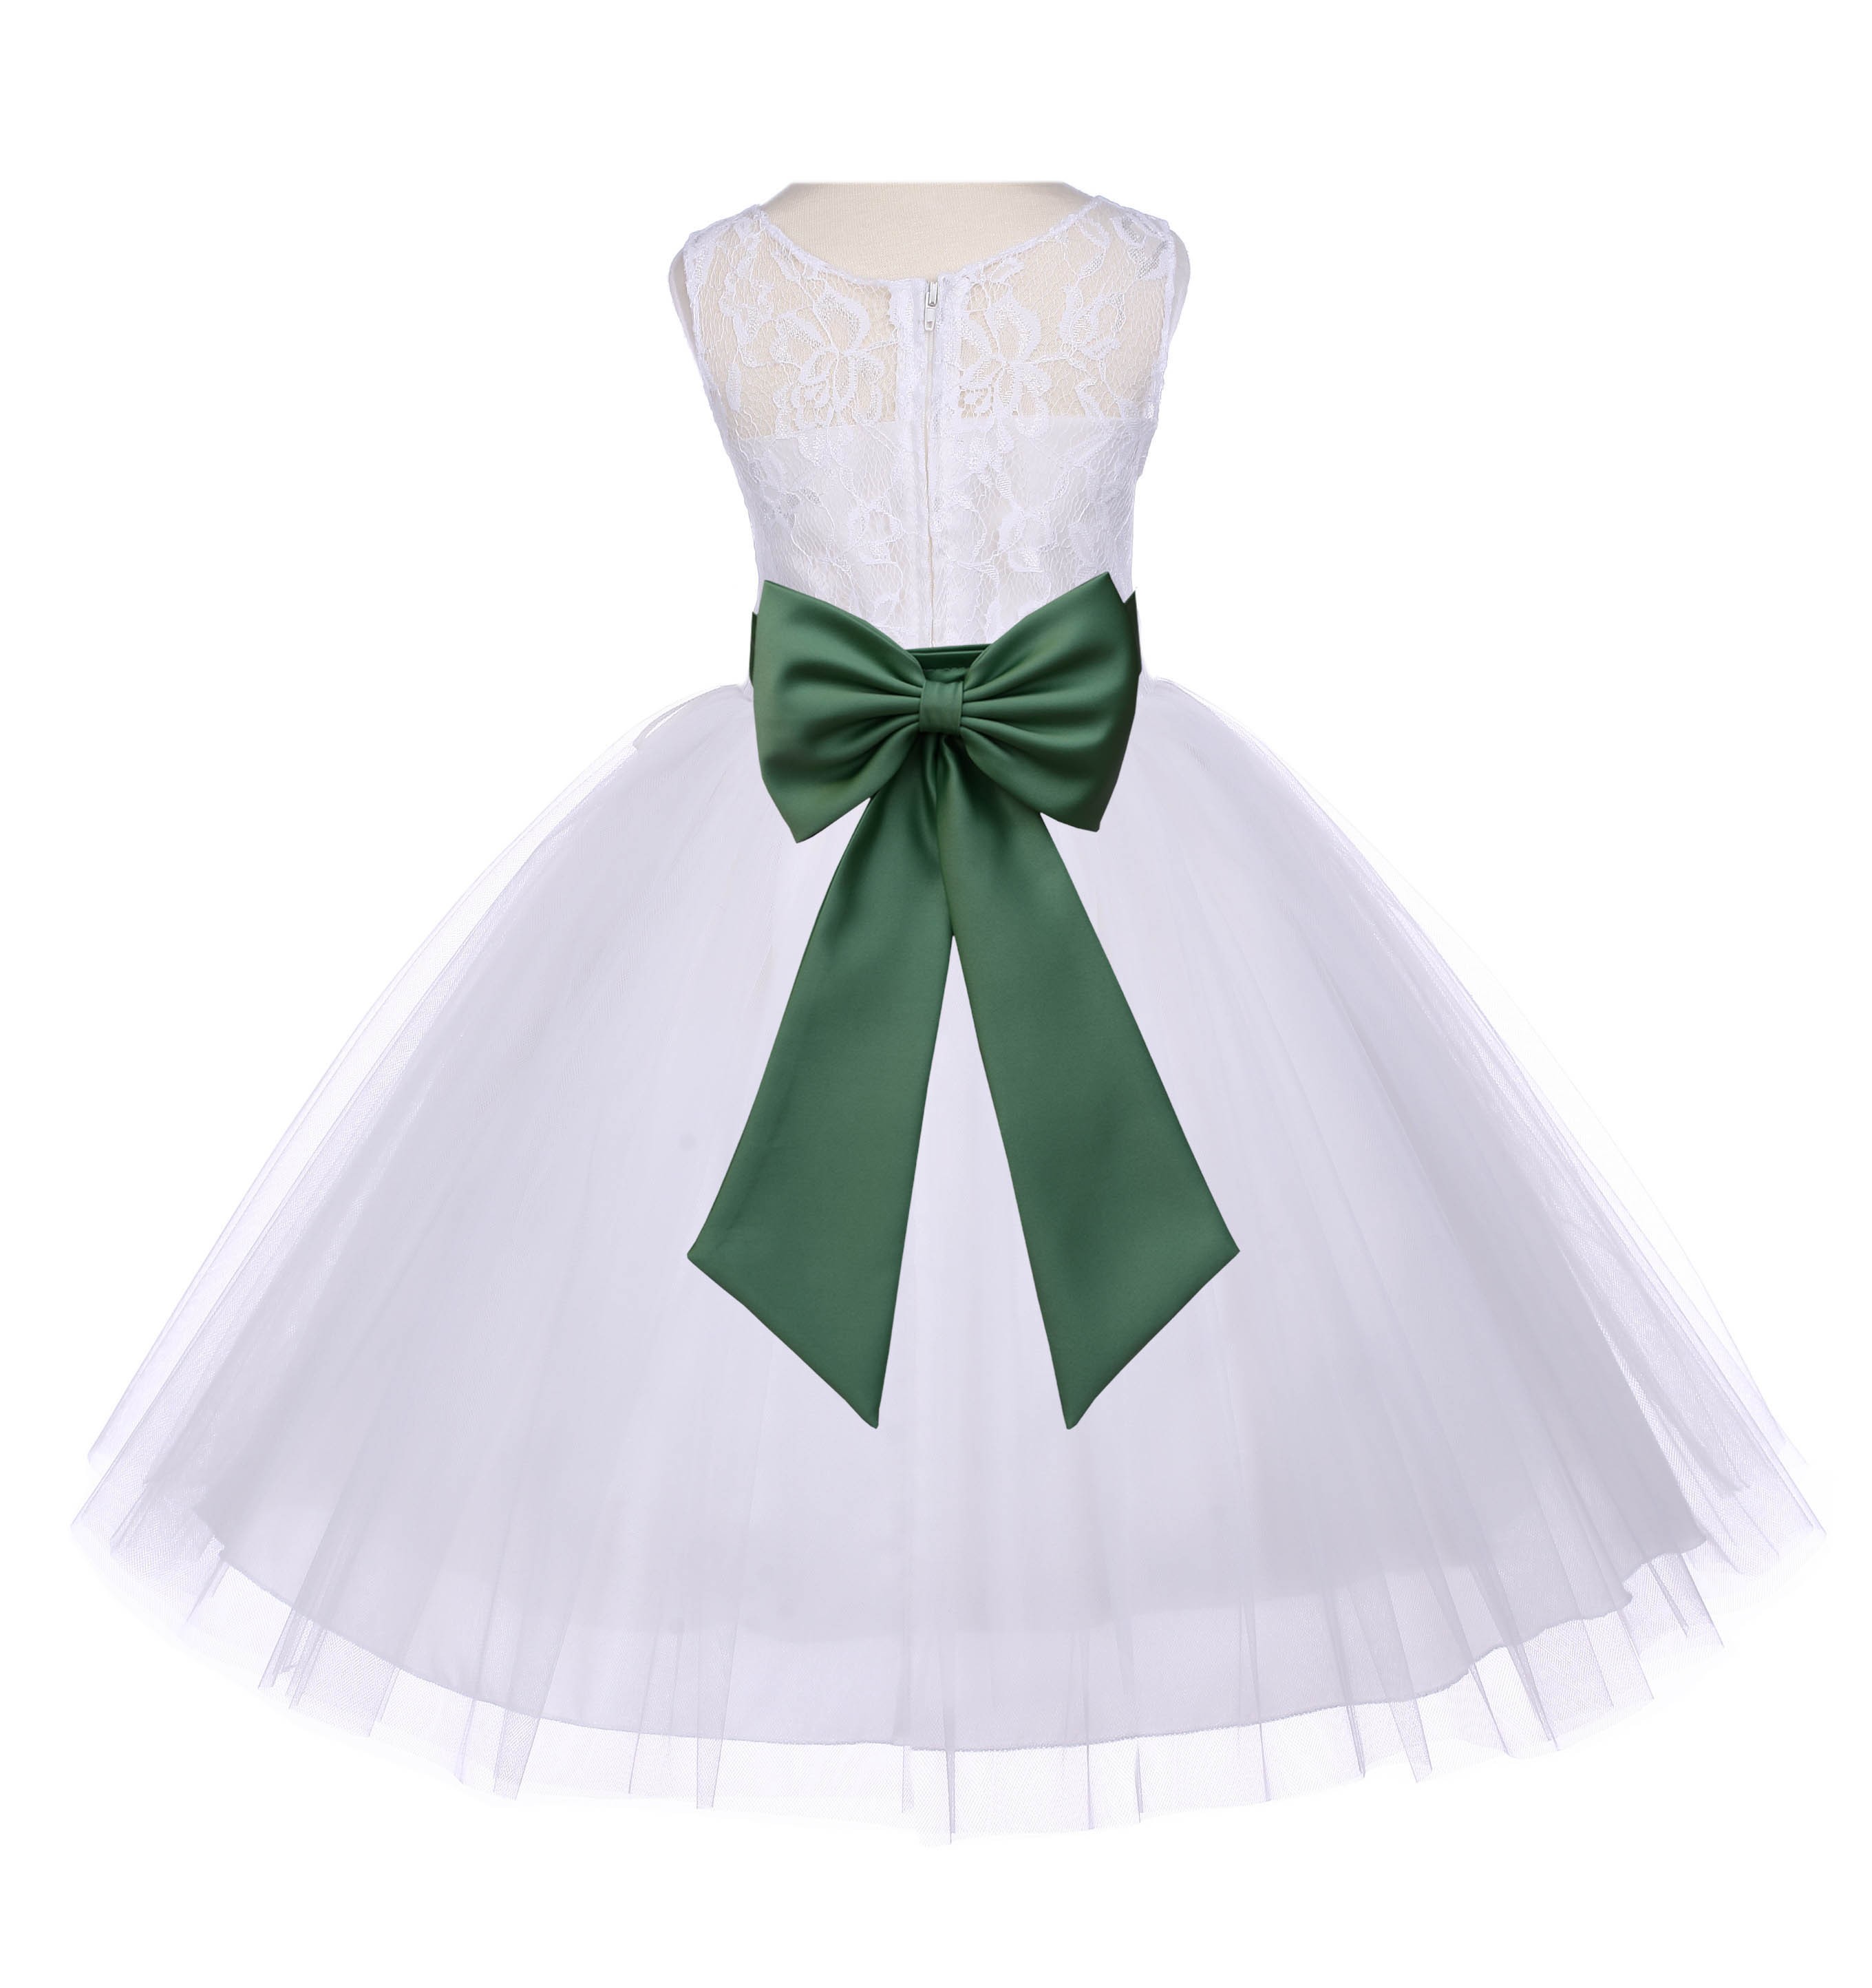 Ivory/Clover Green Floral Lace Bodice Tulle Flower Girl Dress Bridesmaid 153T